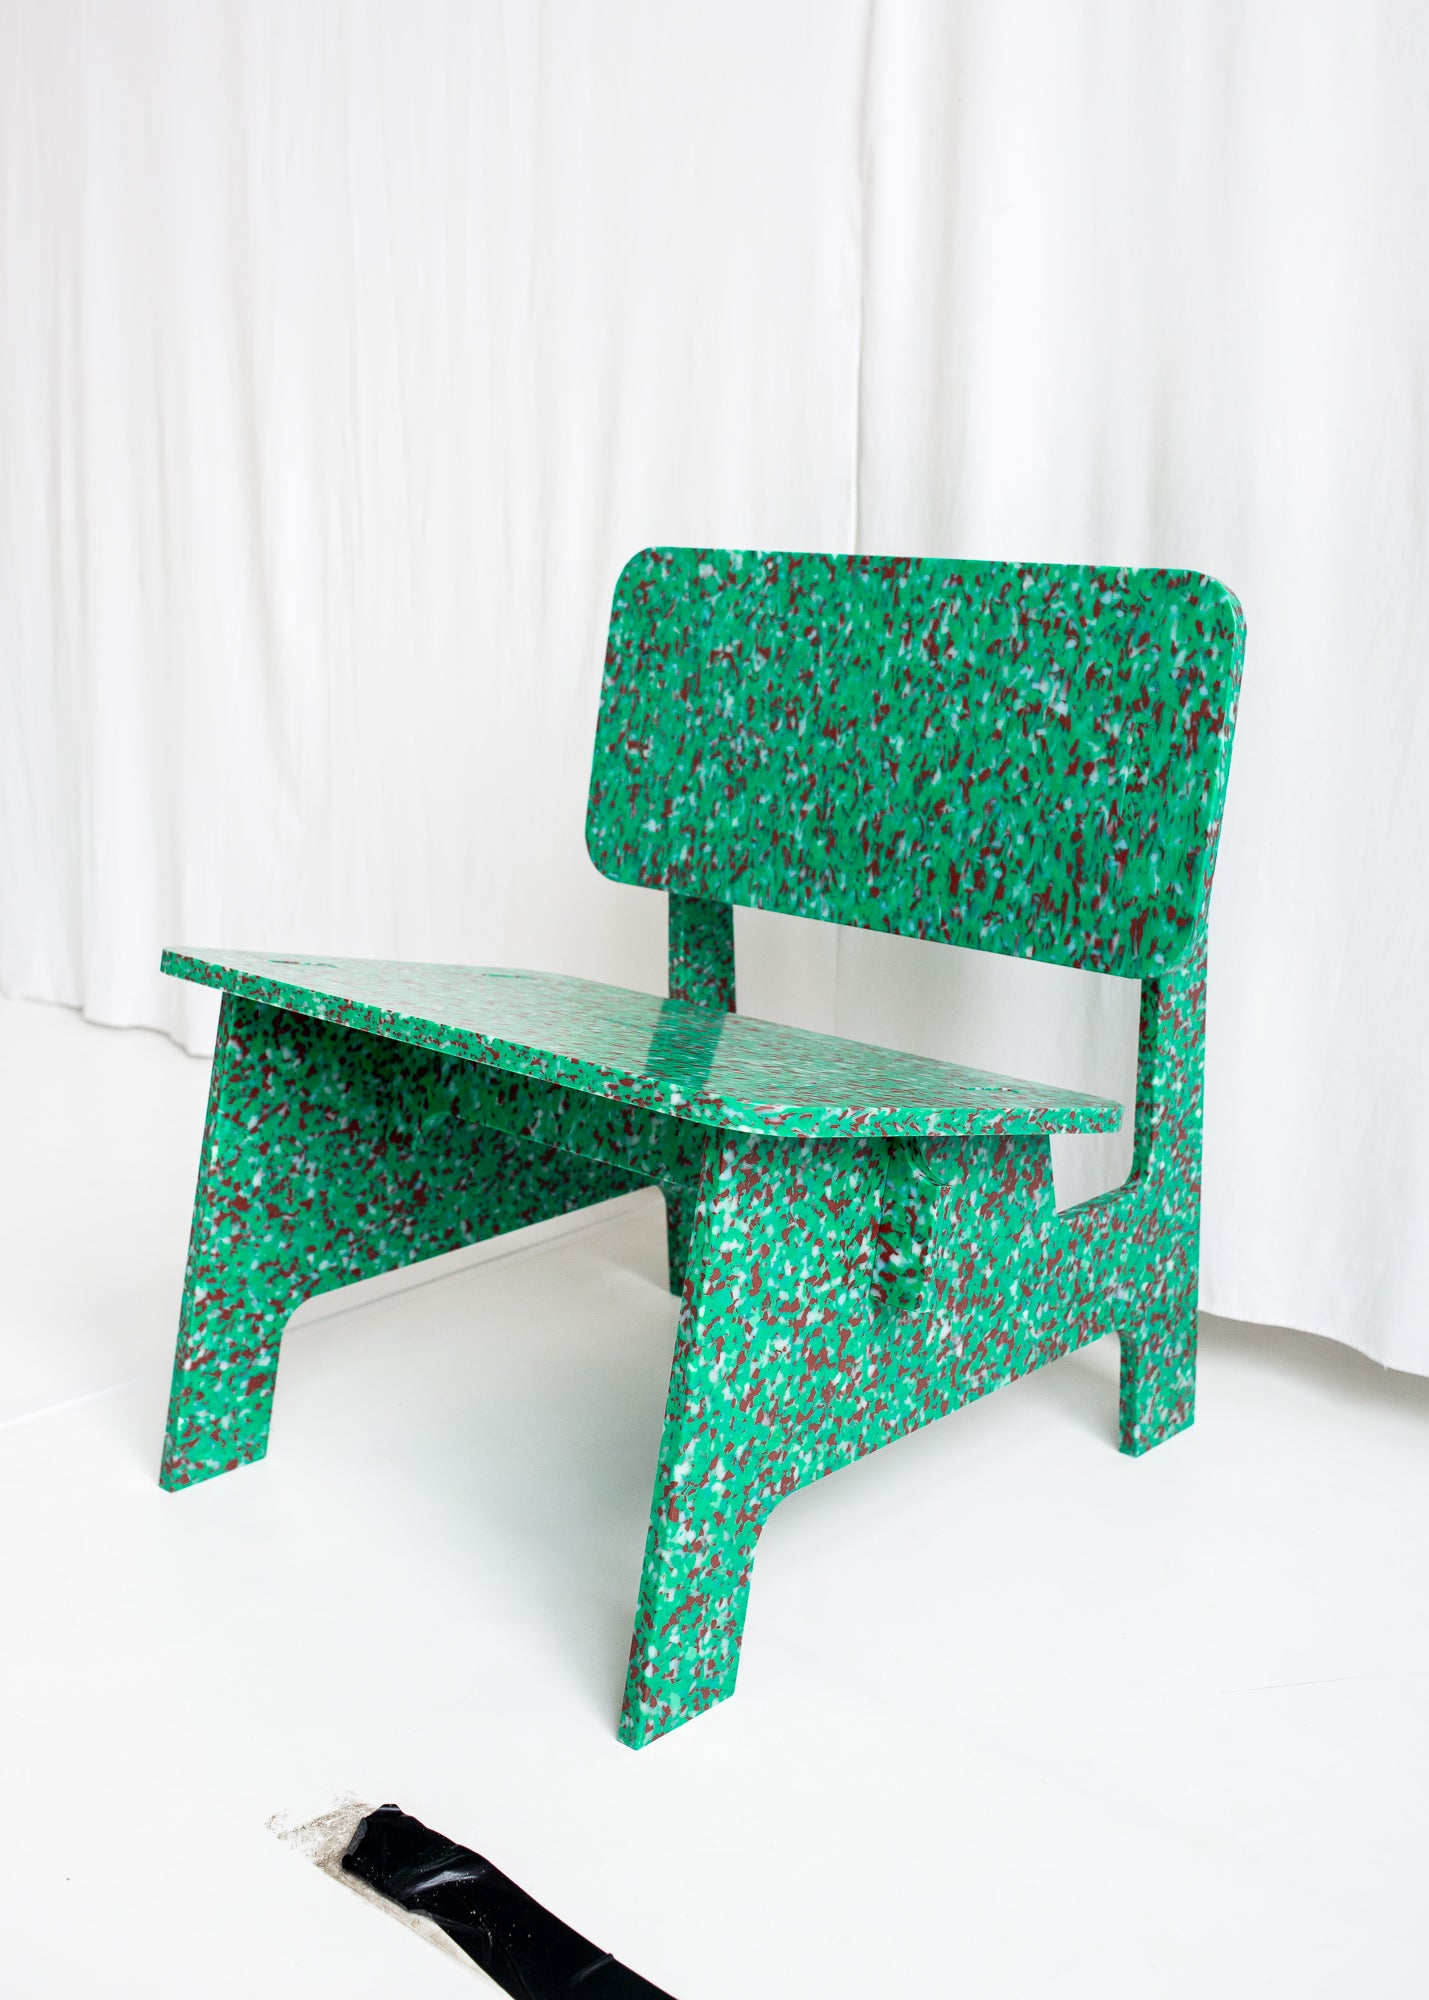 BEAUTIFUL GREEN CHAIR BY THE MINIMONO PROJECT - BRAND FOR ECO FRIENDLY - PLAYFUL - MULTI FUNCTIONAL - SUSTAINABLE - HIGH QUALITY - DESIGN FURNITURE FROM RECYCLED PLASTIC FOR BOTH ADULT AND CHILDREN MADE IN BERLIN GERMANY